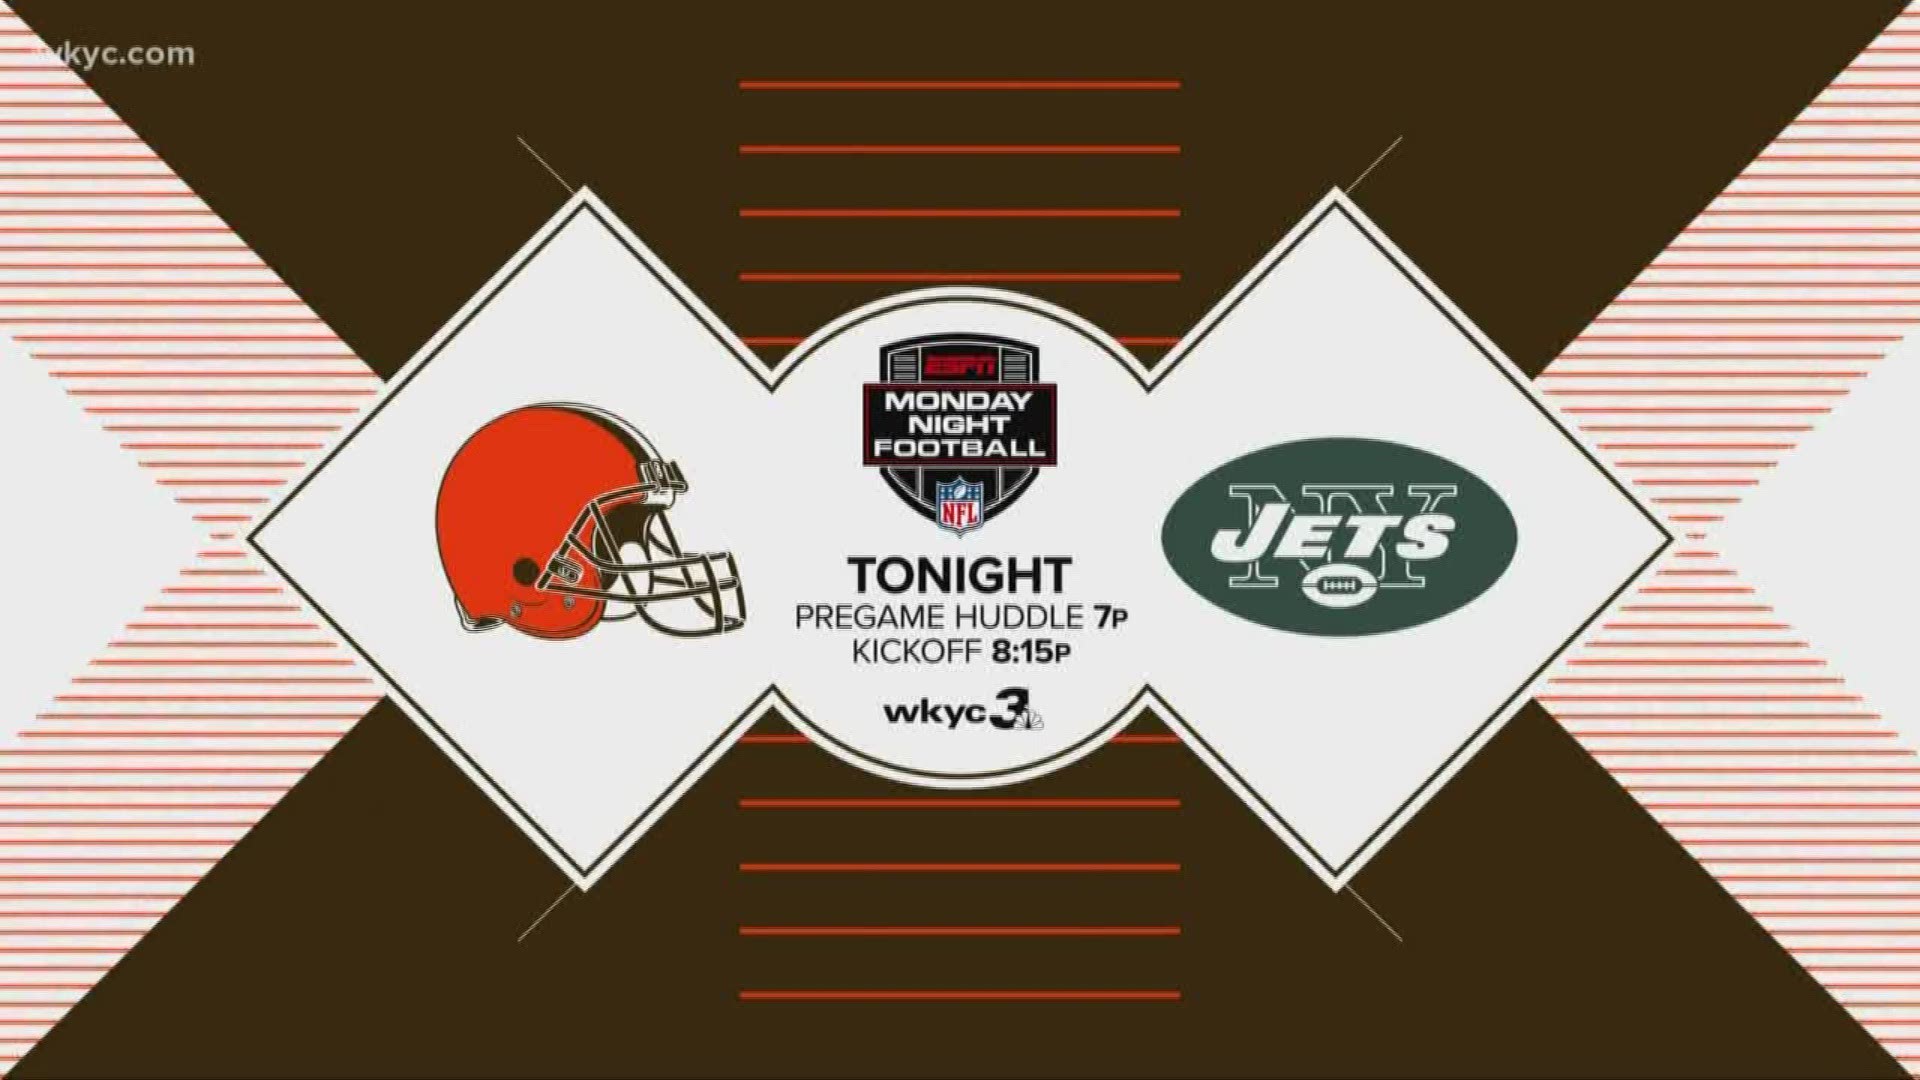 monday night football tonight what time and channel